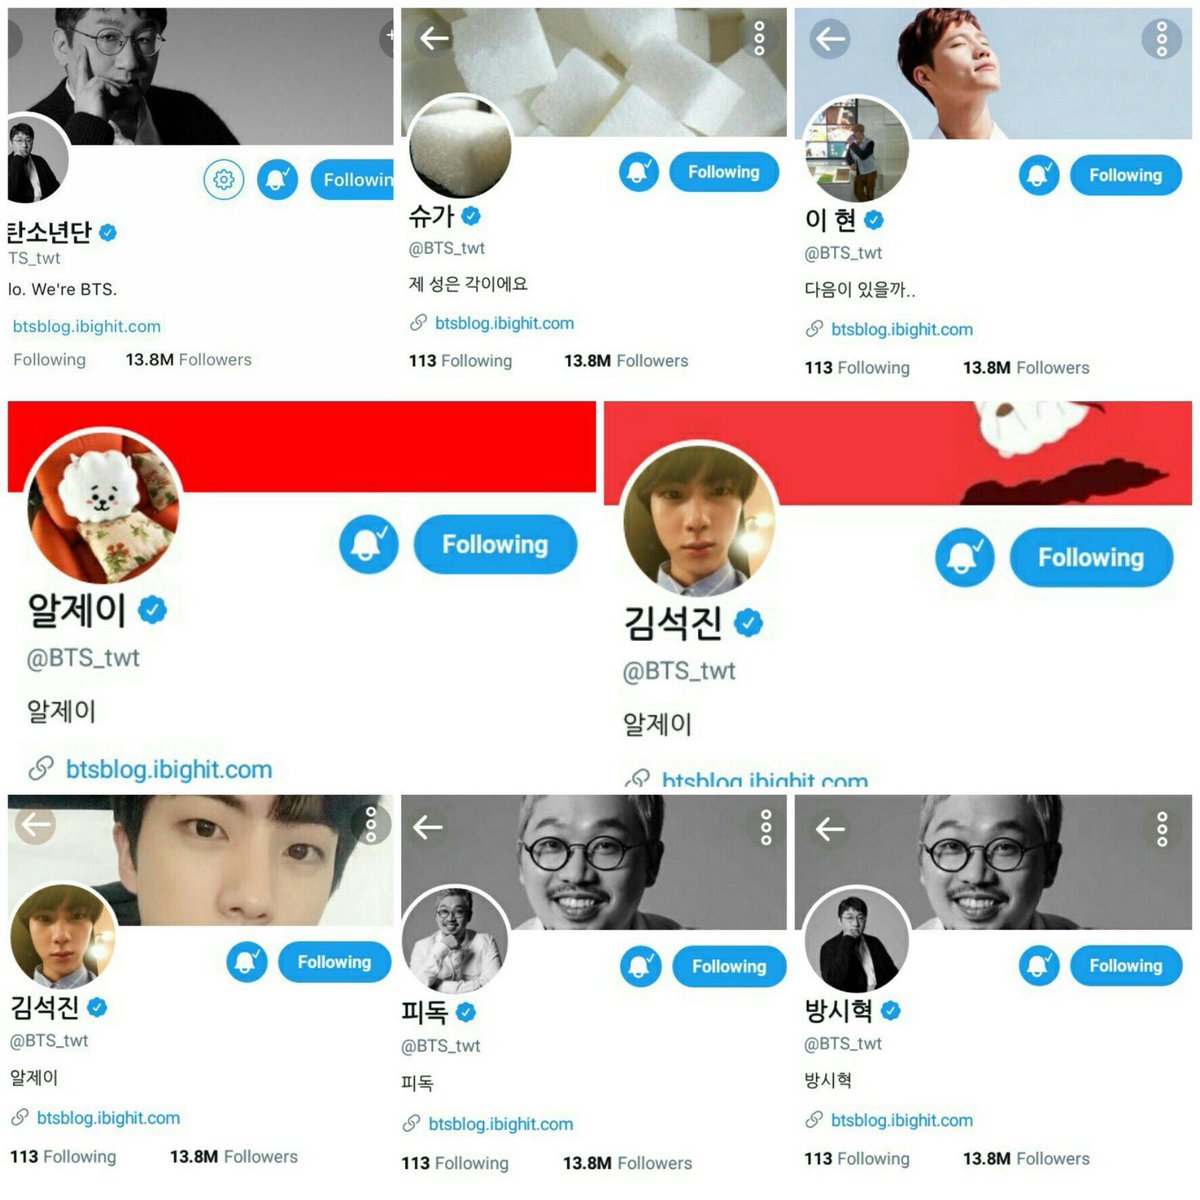 So many  @BTS_twt layout changes for April Fools 2018! Jin, RJ, Yoongi’s sugar cubes were amazing (+ his sugar cane field post abt missing ‘hometown’ was *chefs kiss*) But poor Pdogg & Bang PD, April Fools BTS had no mercy(Also  @btschartdata under Yoongi’s sugar canes)